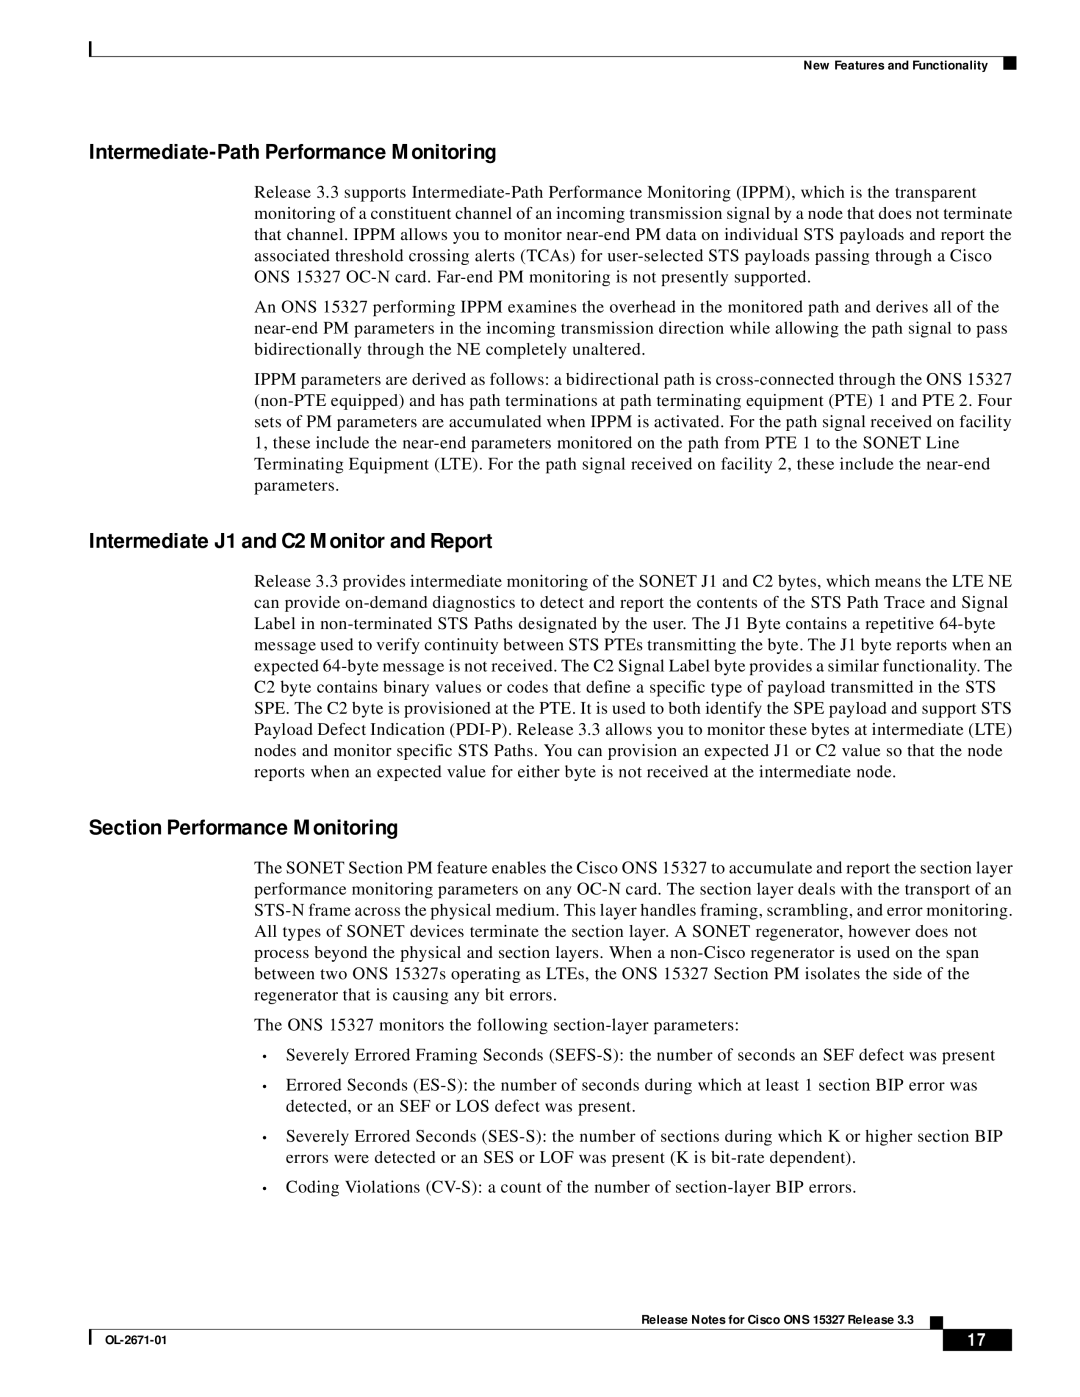 Cisco Systems ONS 15327 manual Intermediate-Path Performance Monitoring, Intermediate J1 and C2 Monitor and Report 